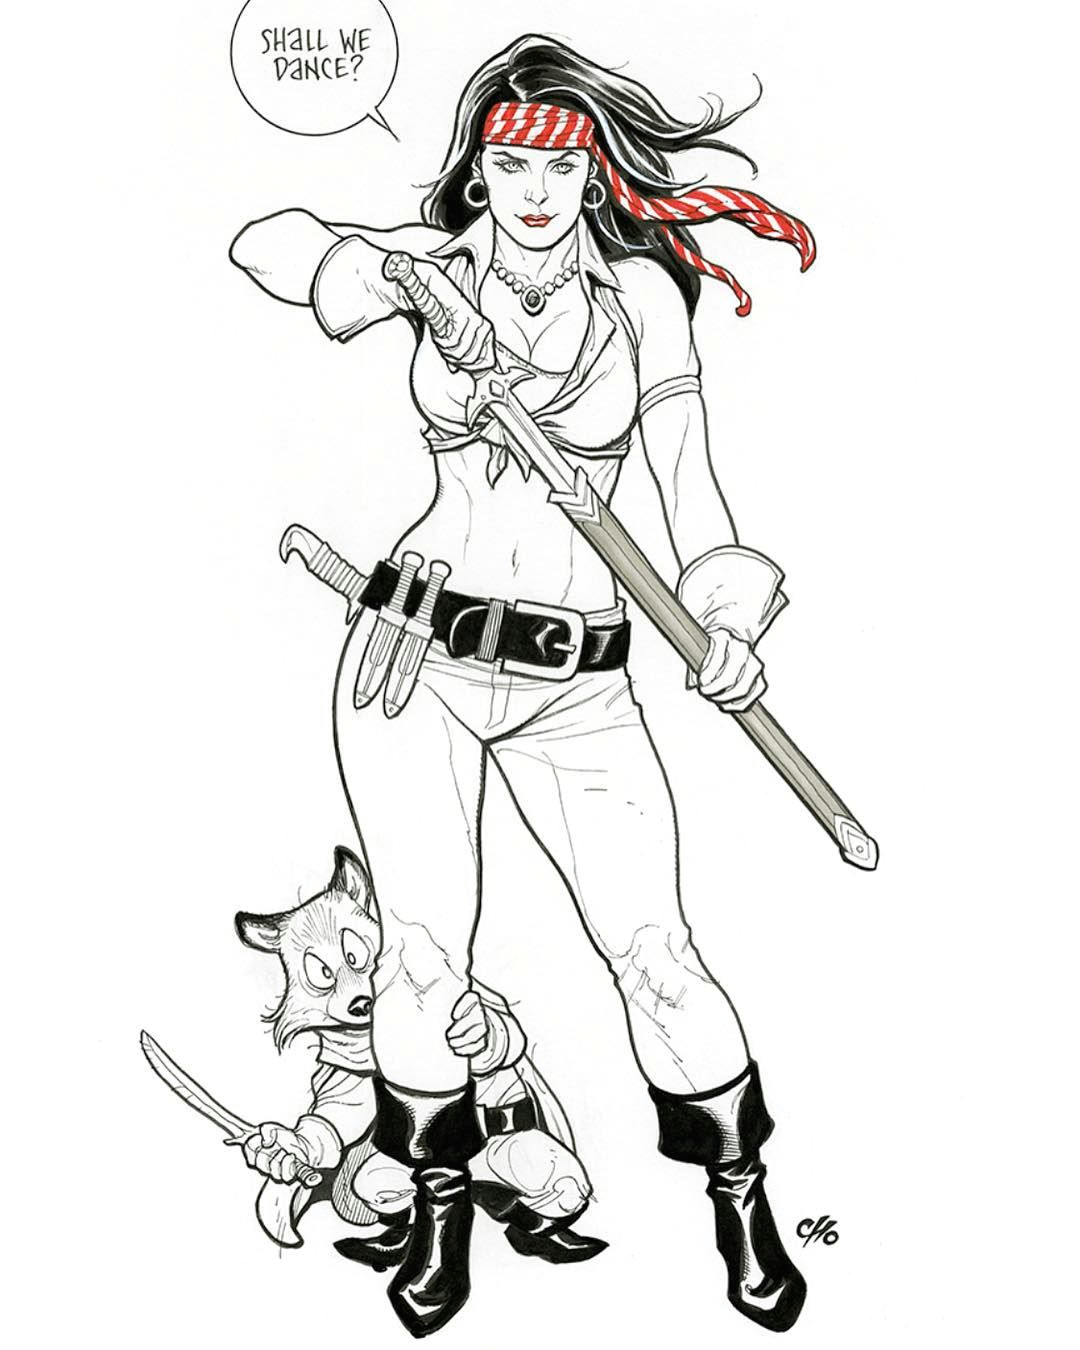 Drawing Cartoon Pin Ups Serra the Buccaneer Pin Up Just Finished the Drawing for the